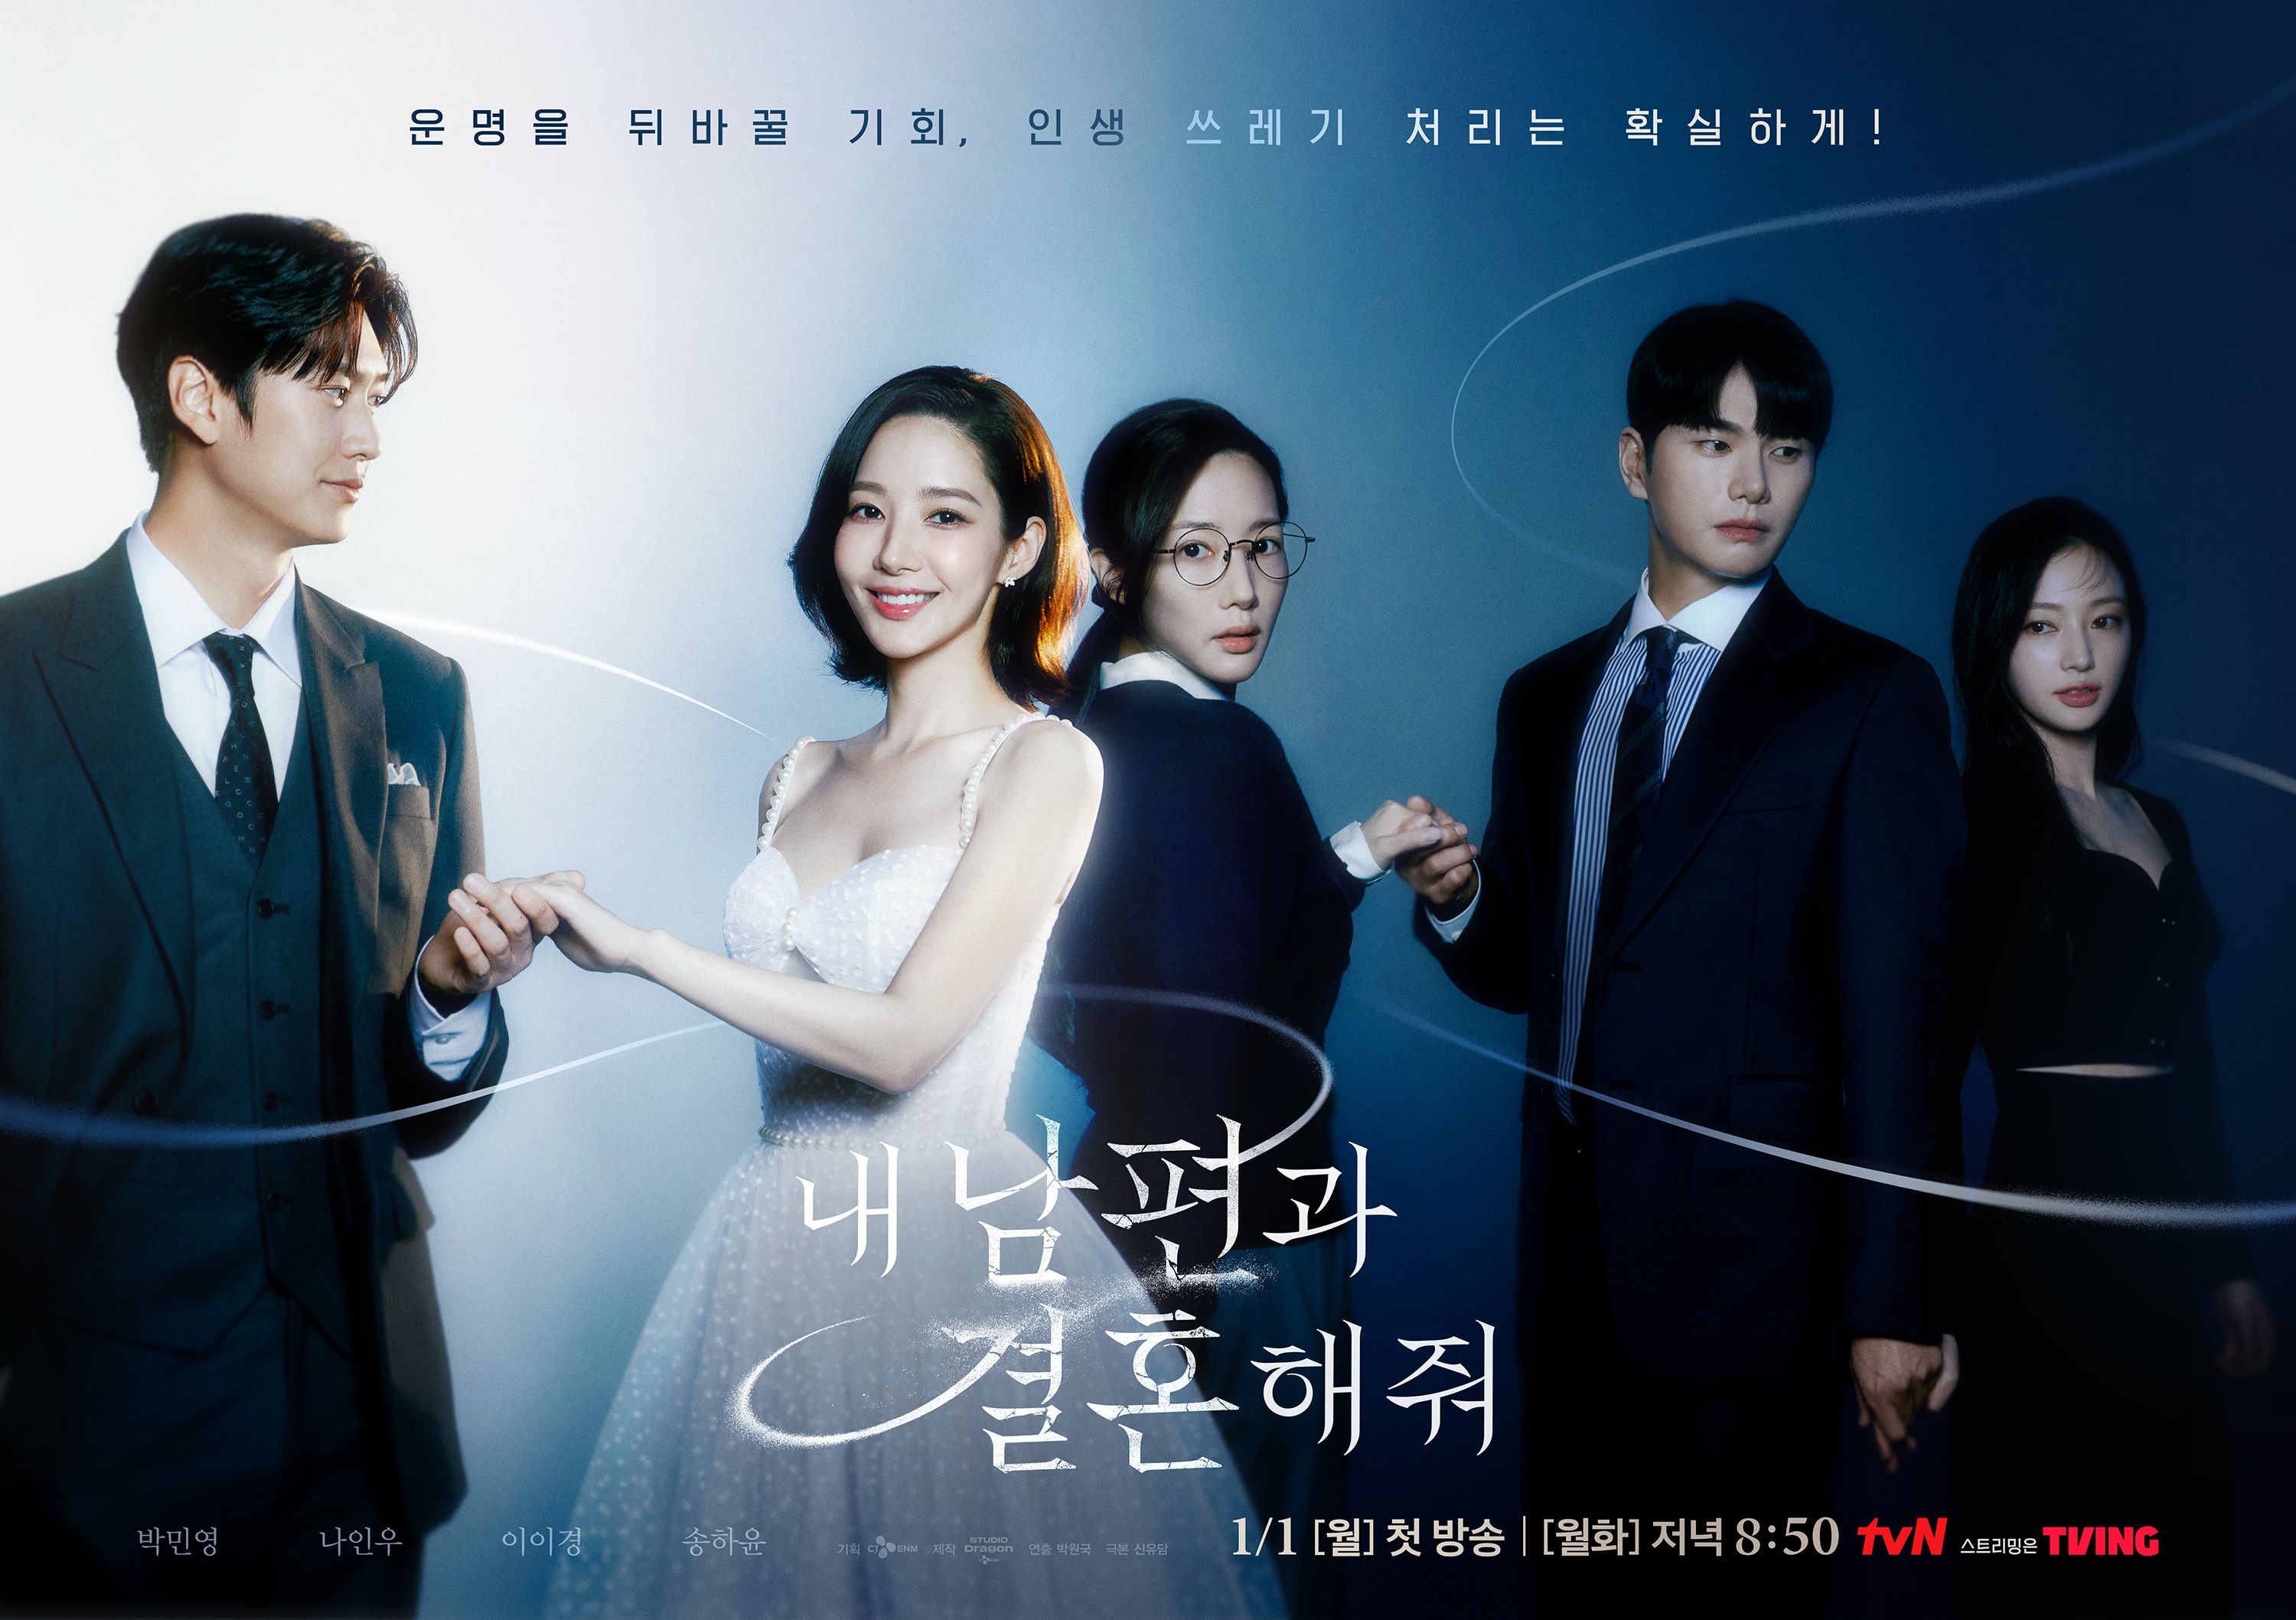 5 contract relationship K-dramas that prove fake bonds can lead to